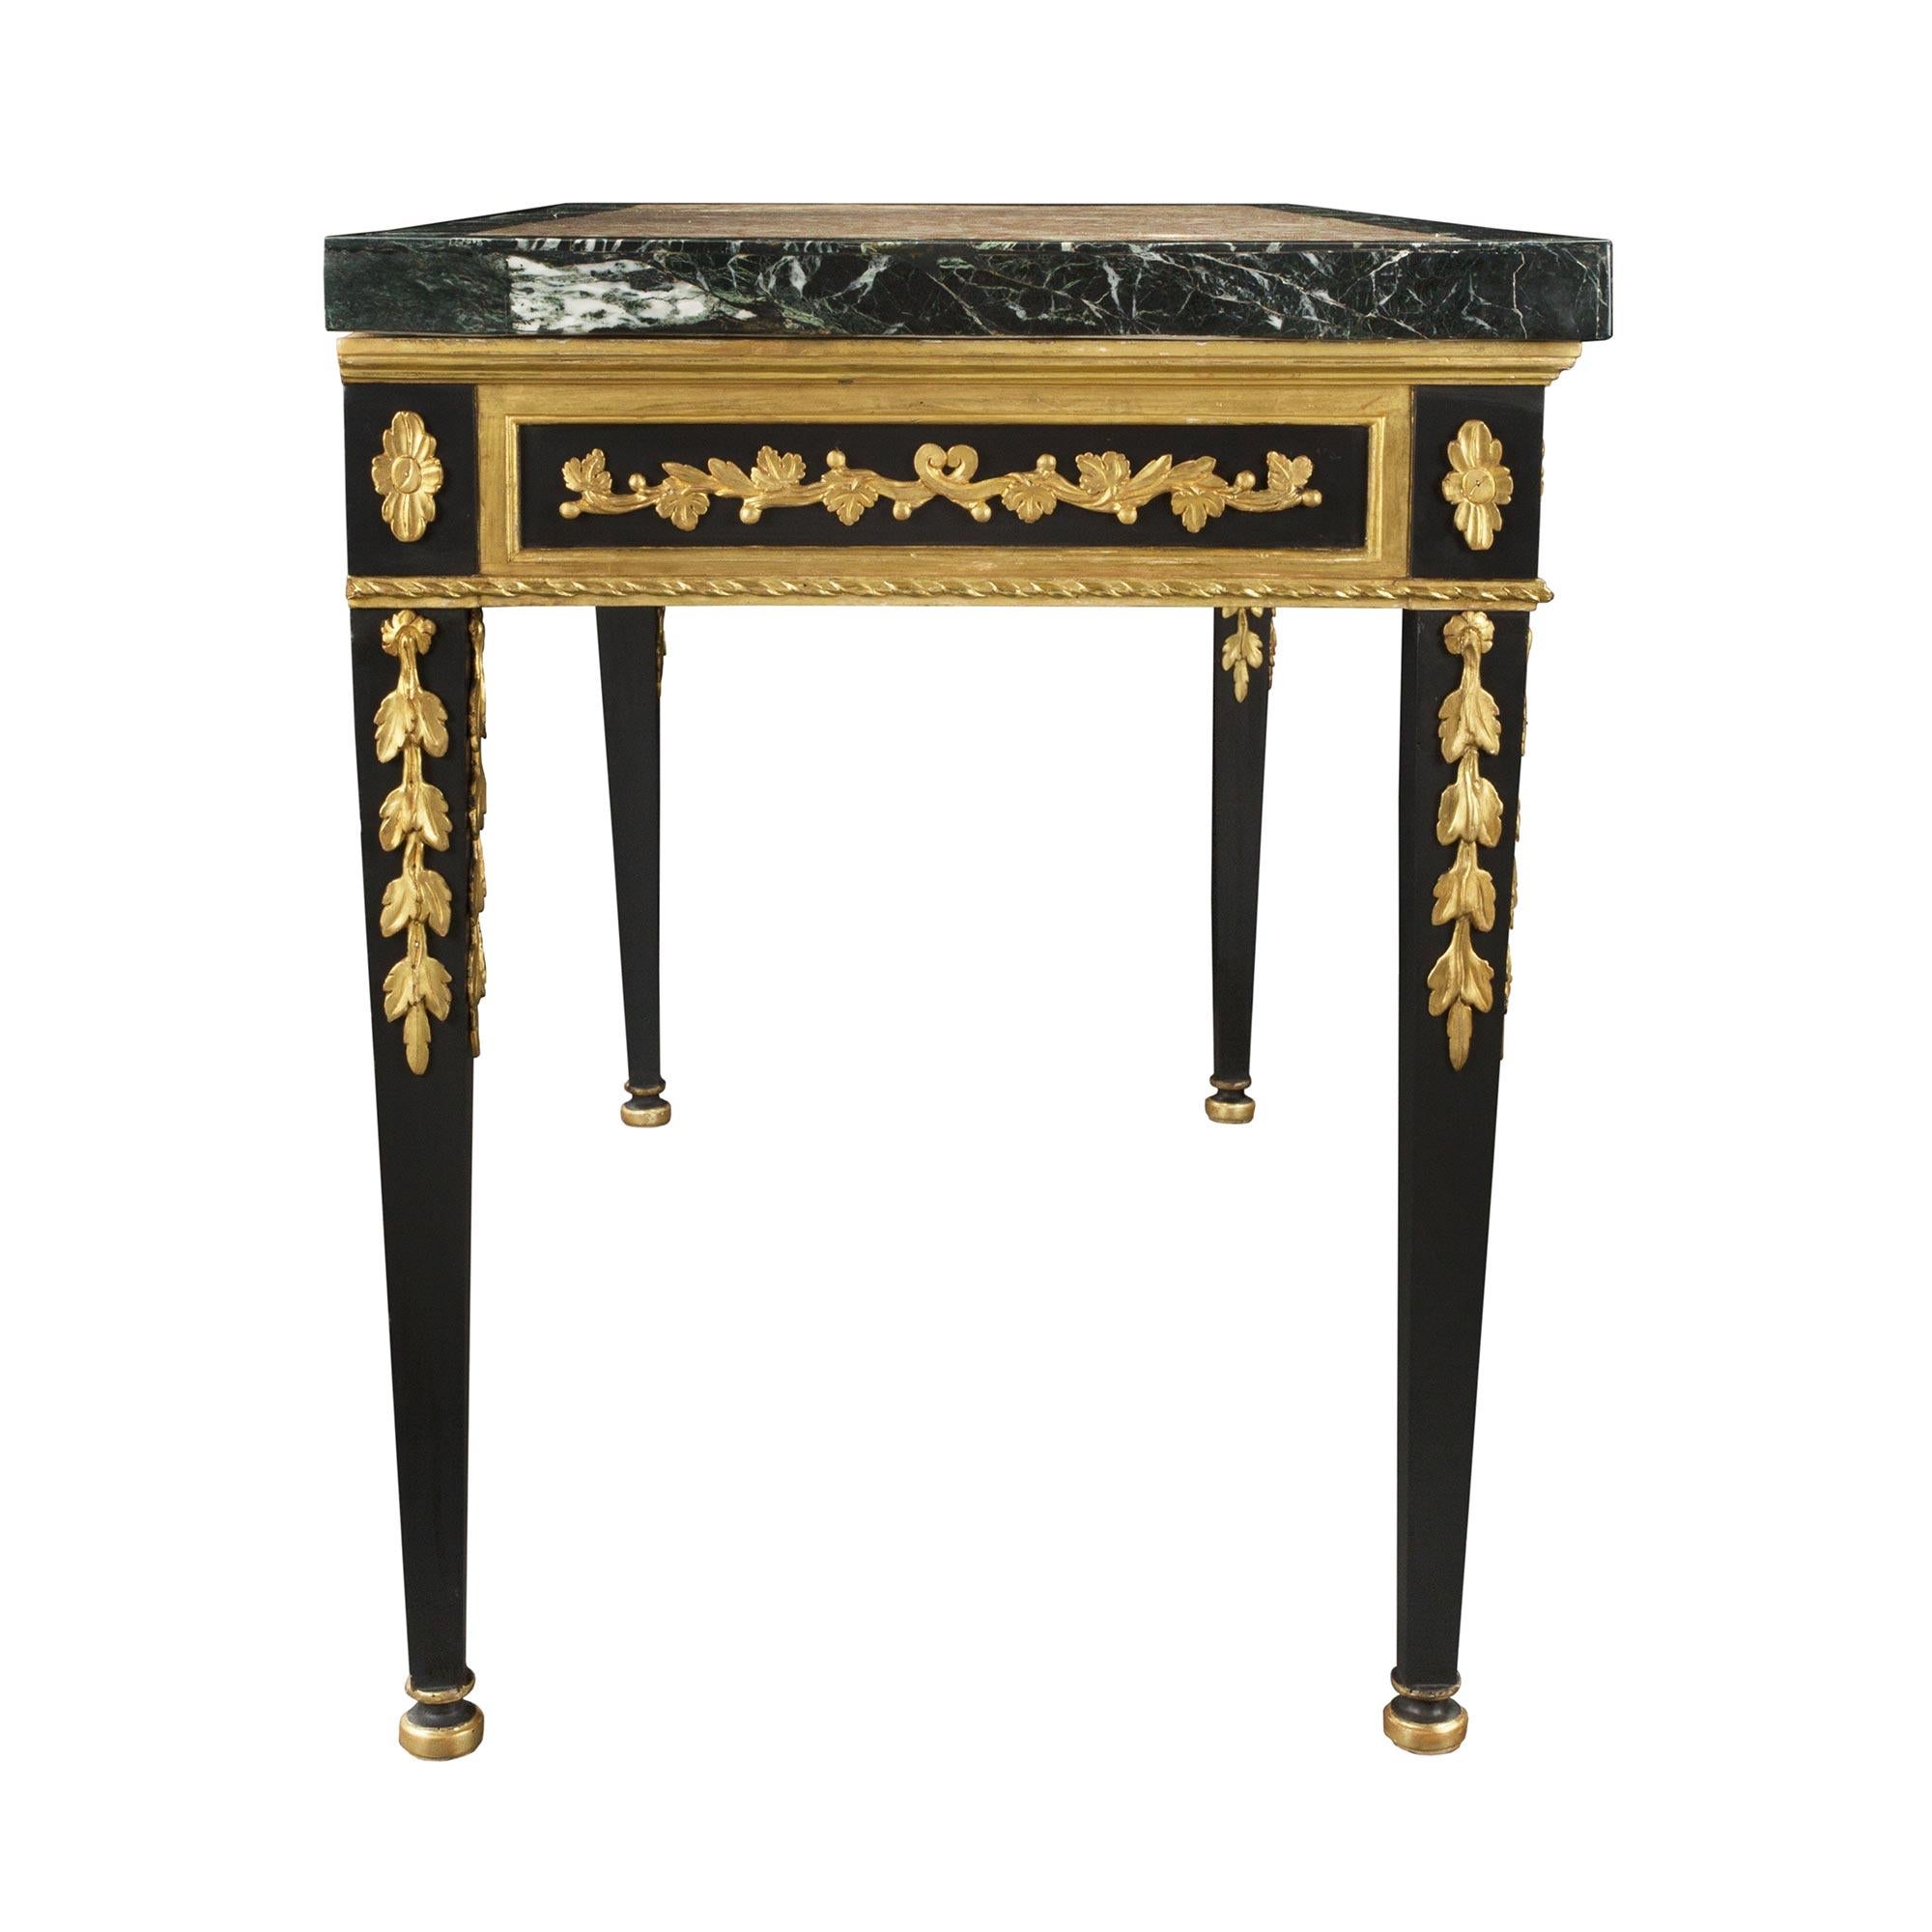 Italian 19th Century Louis XVI Giltwood and Marble Freestanding Console For Sale 1